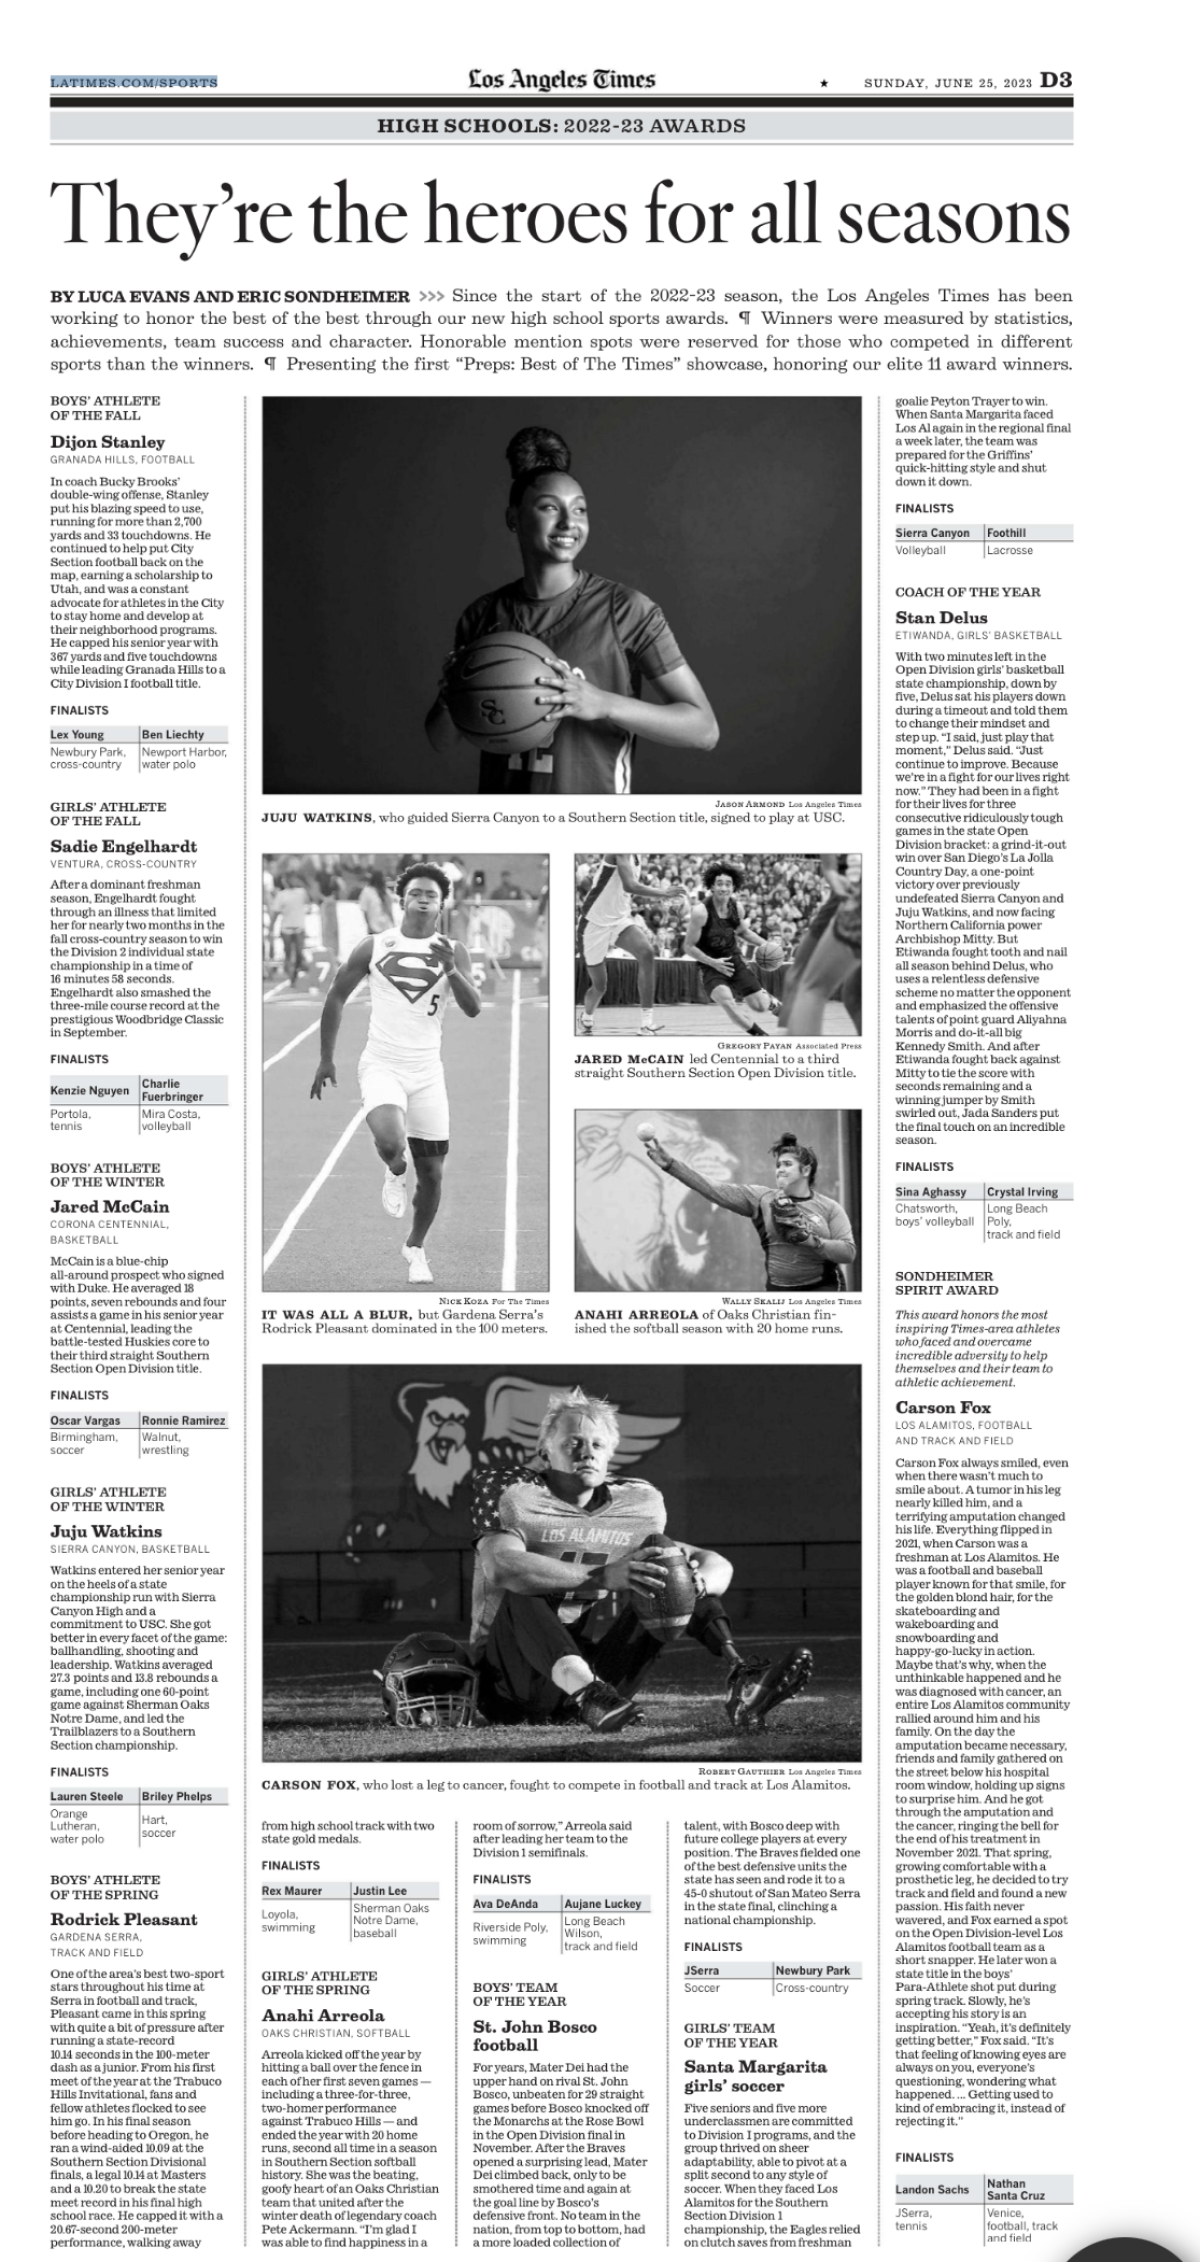 The L.A. Times high school sports awards for 2022-23.